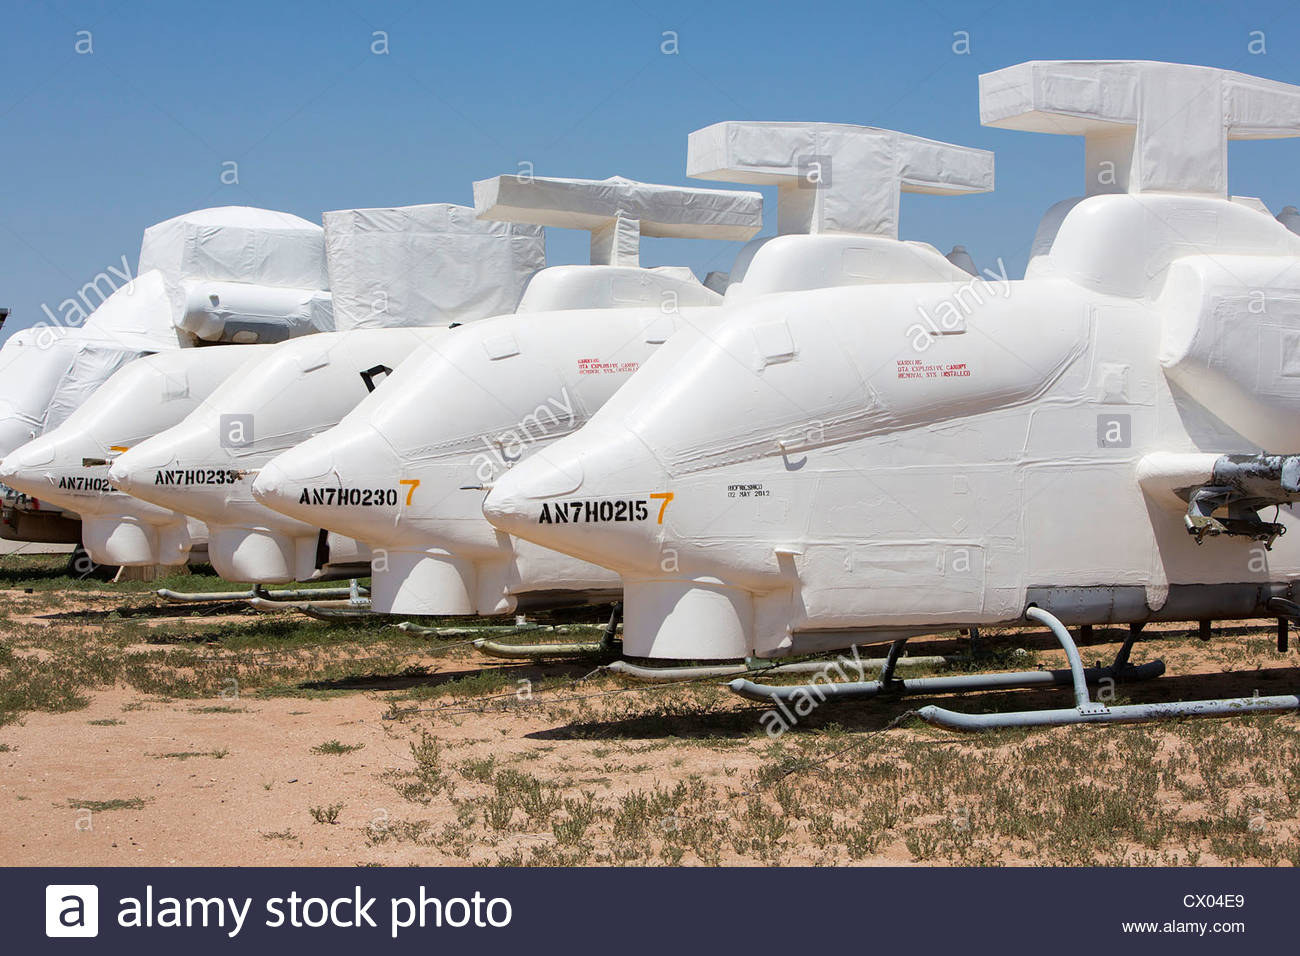 ah-1-cobra-helicopters-in-storage-at-the-309th-aerospace-maintenance-CX04E9.jpg